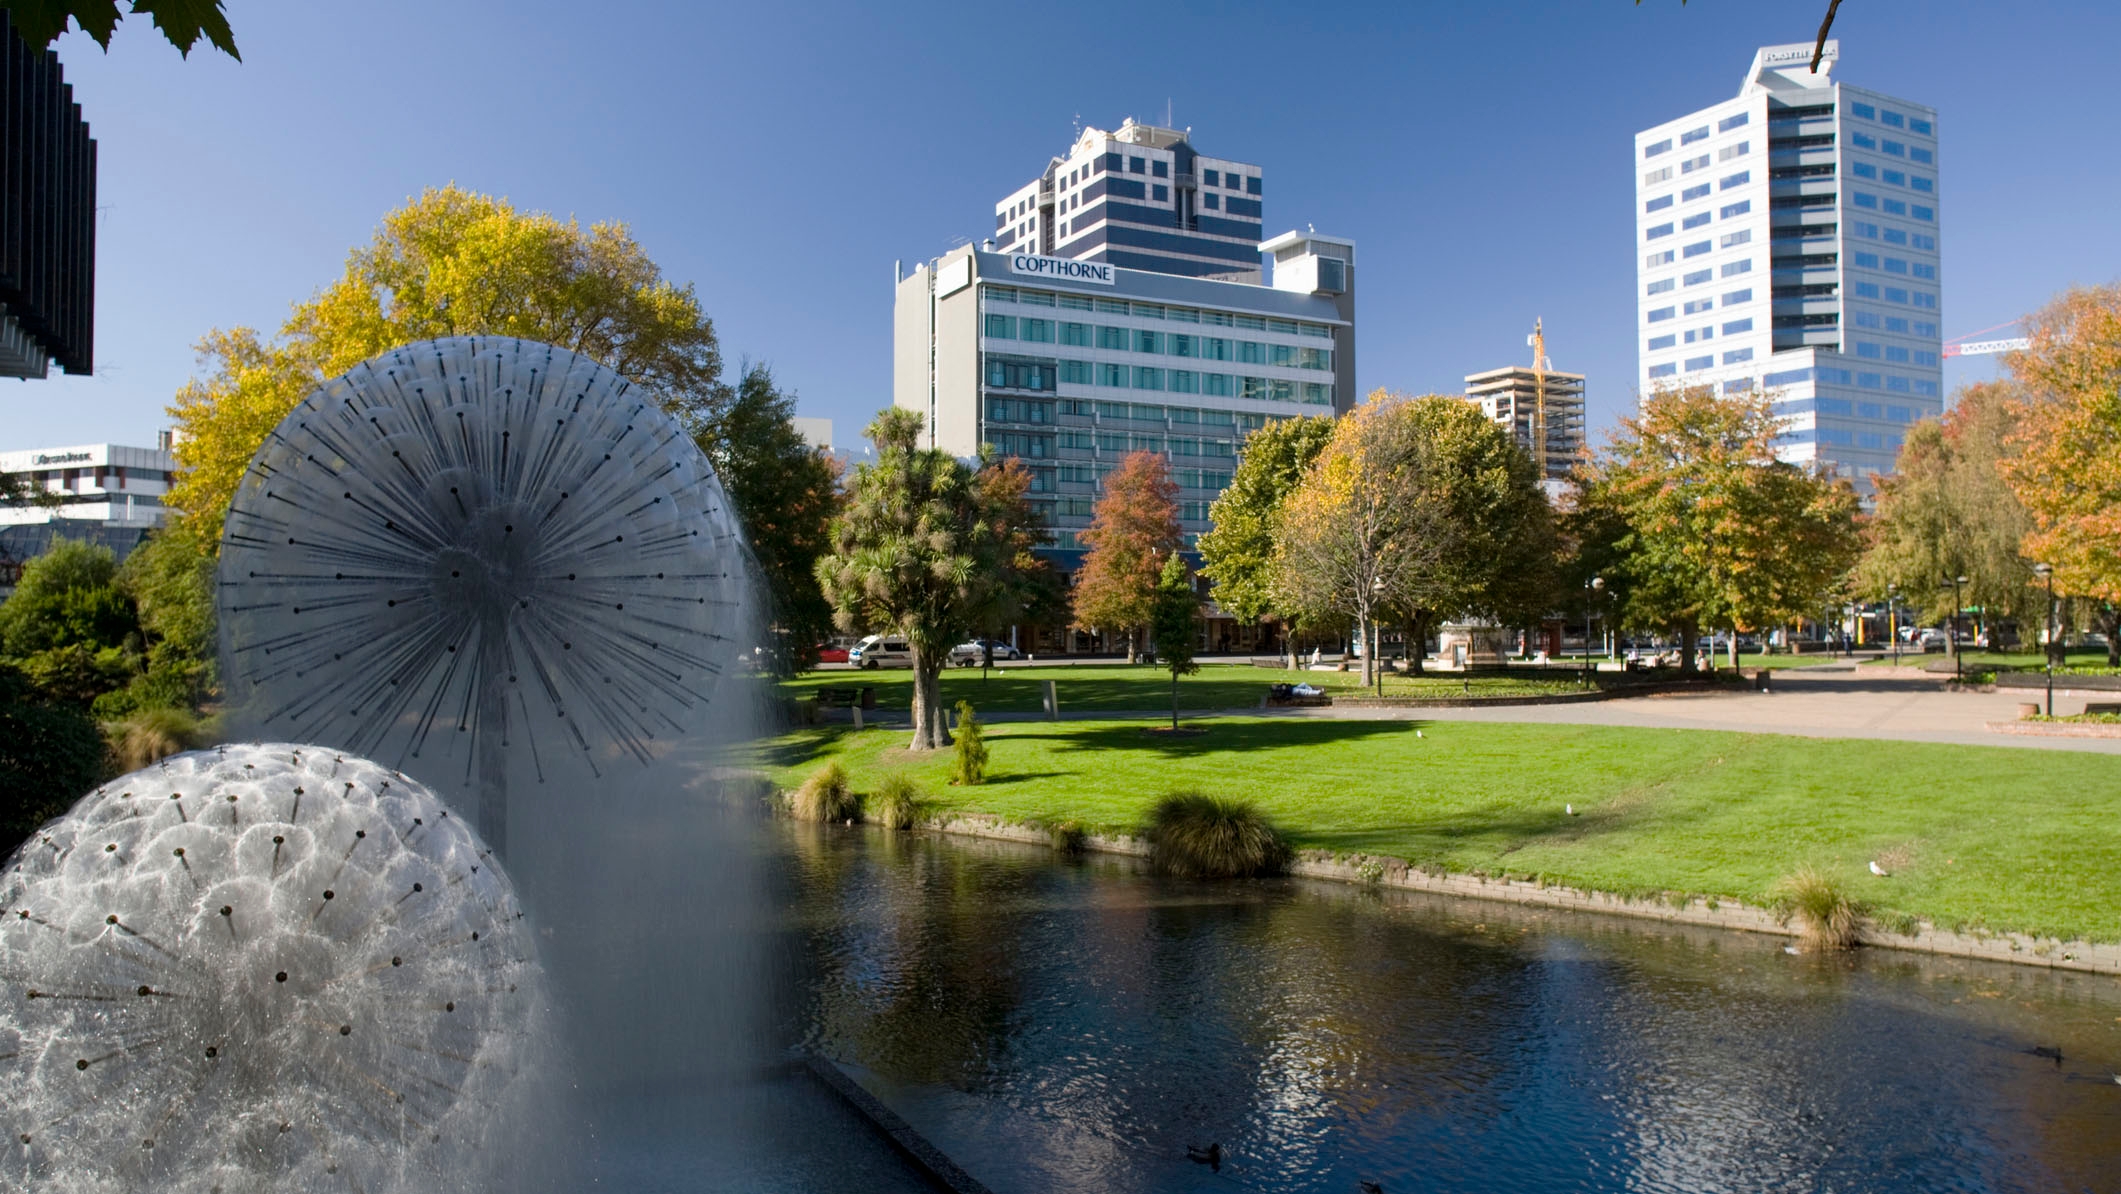 High rise buildings with a park and water fountain in the foreground